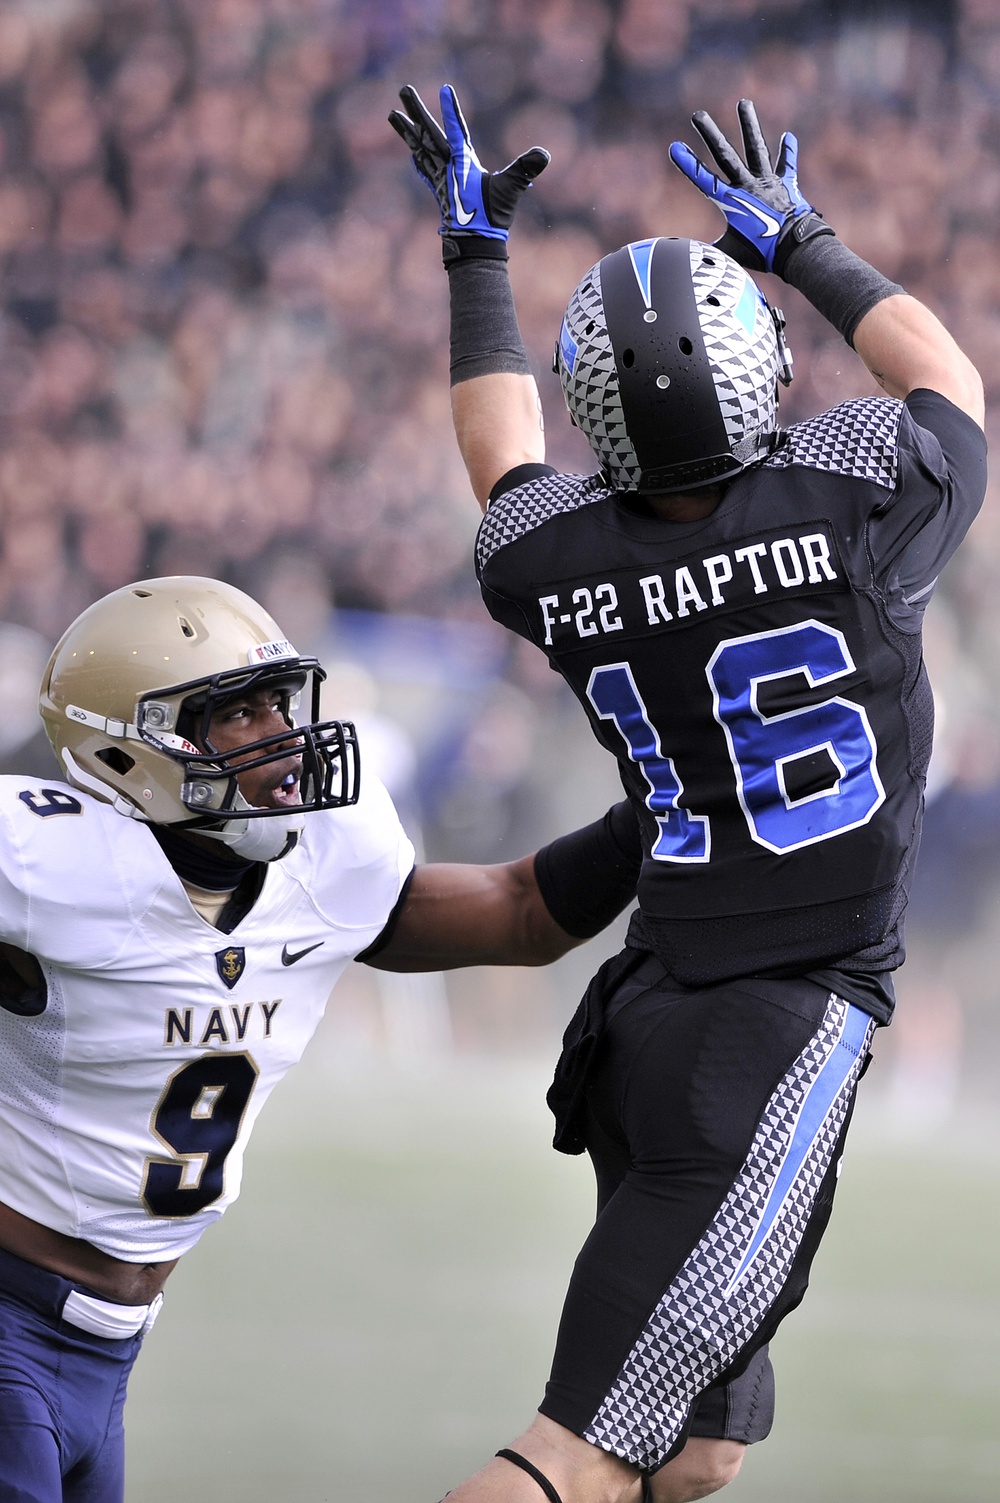 DVIDS Images Air Force vs. Navy football [Image 7 of 21]